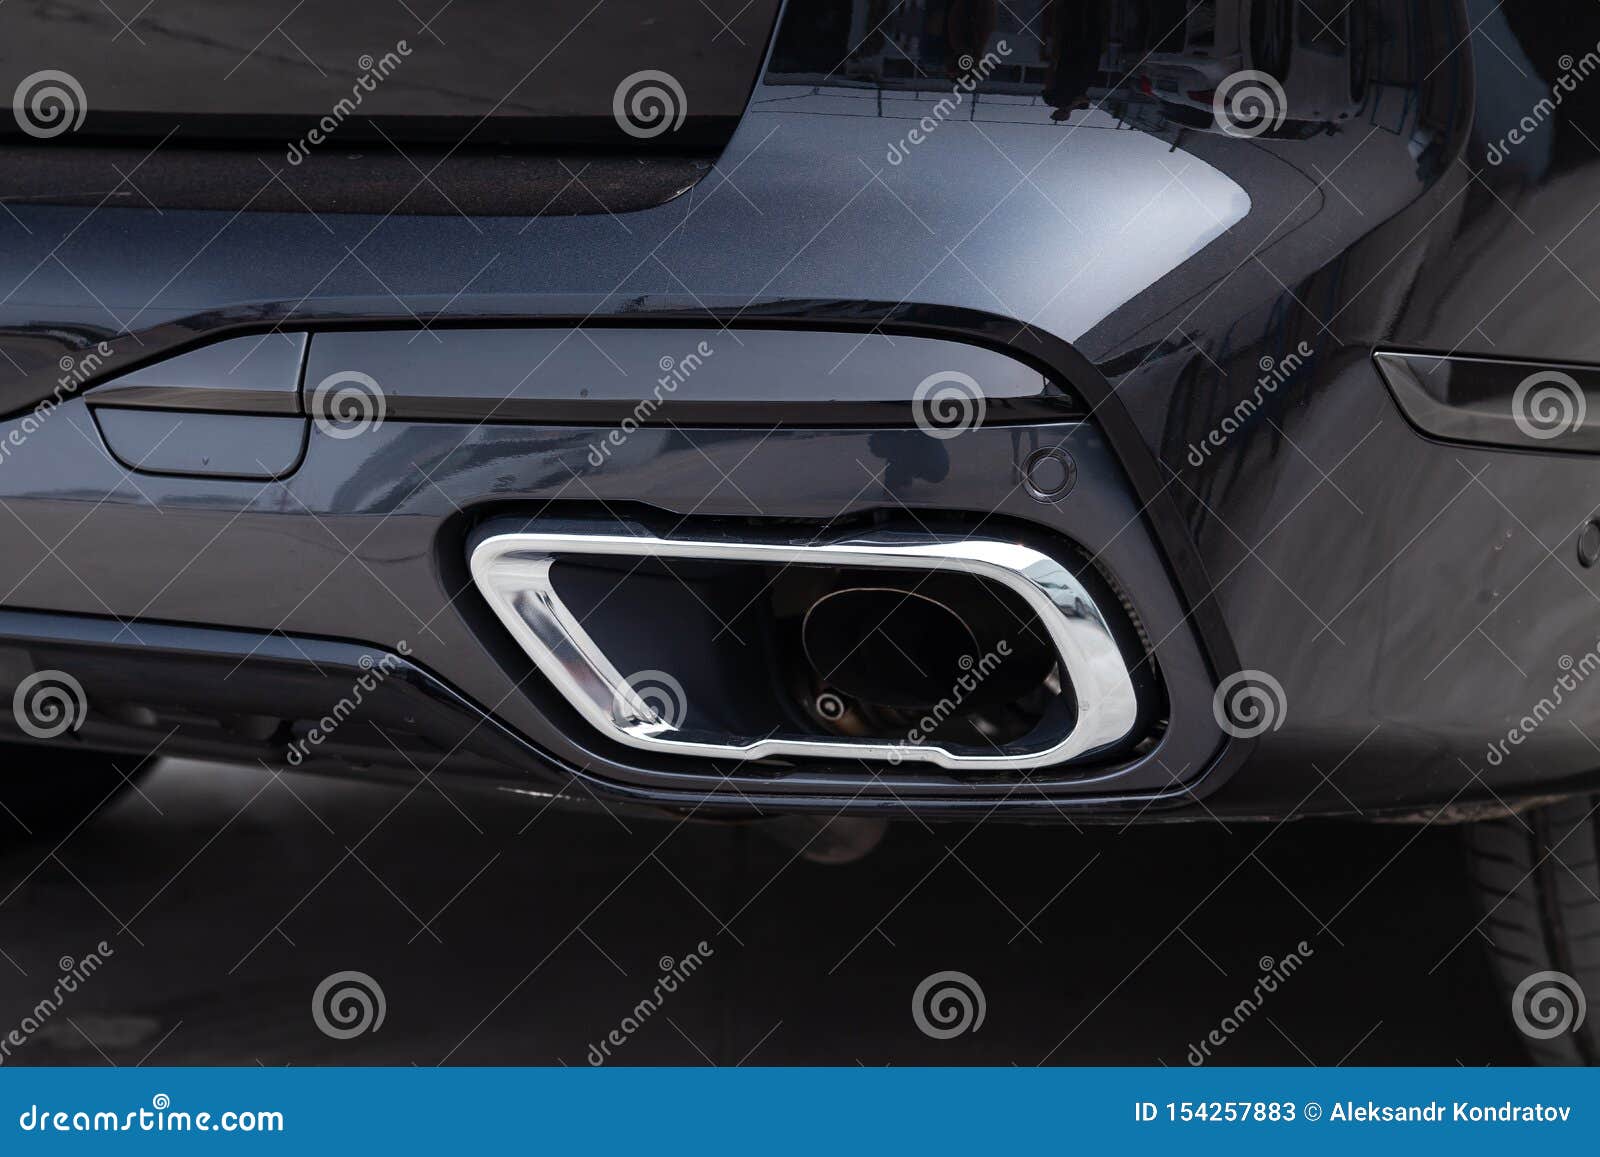 Black New Bmw X7 Xdrive40i 2019 Year Rear Exhaust Pipe View